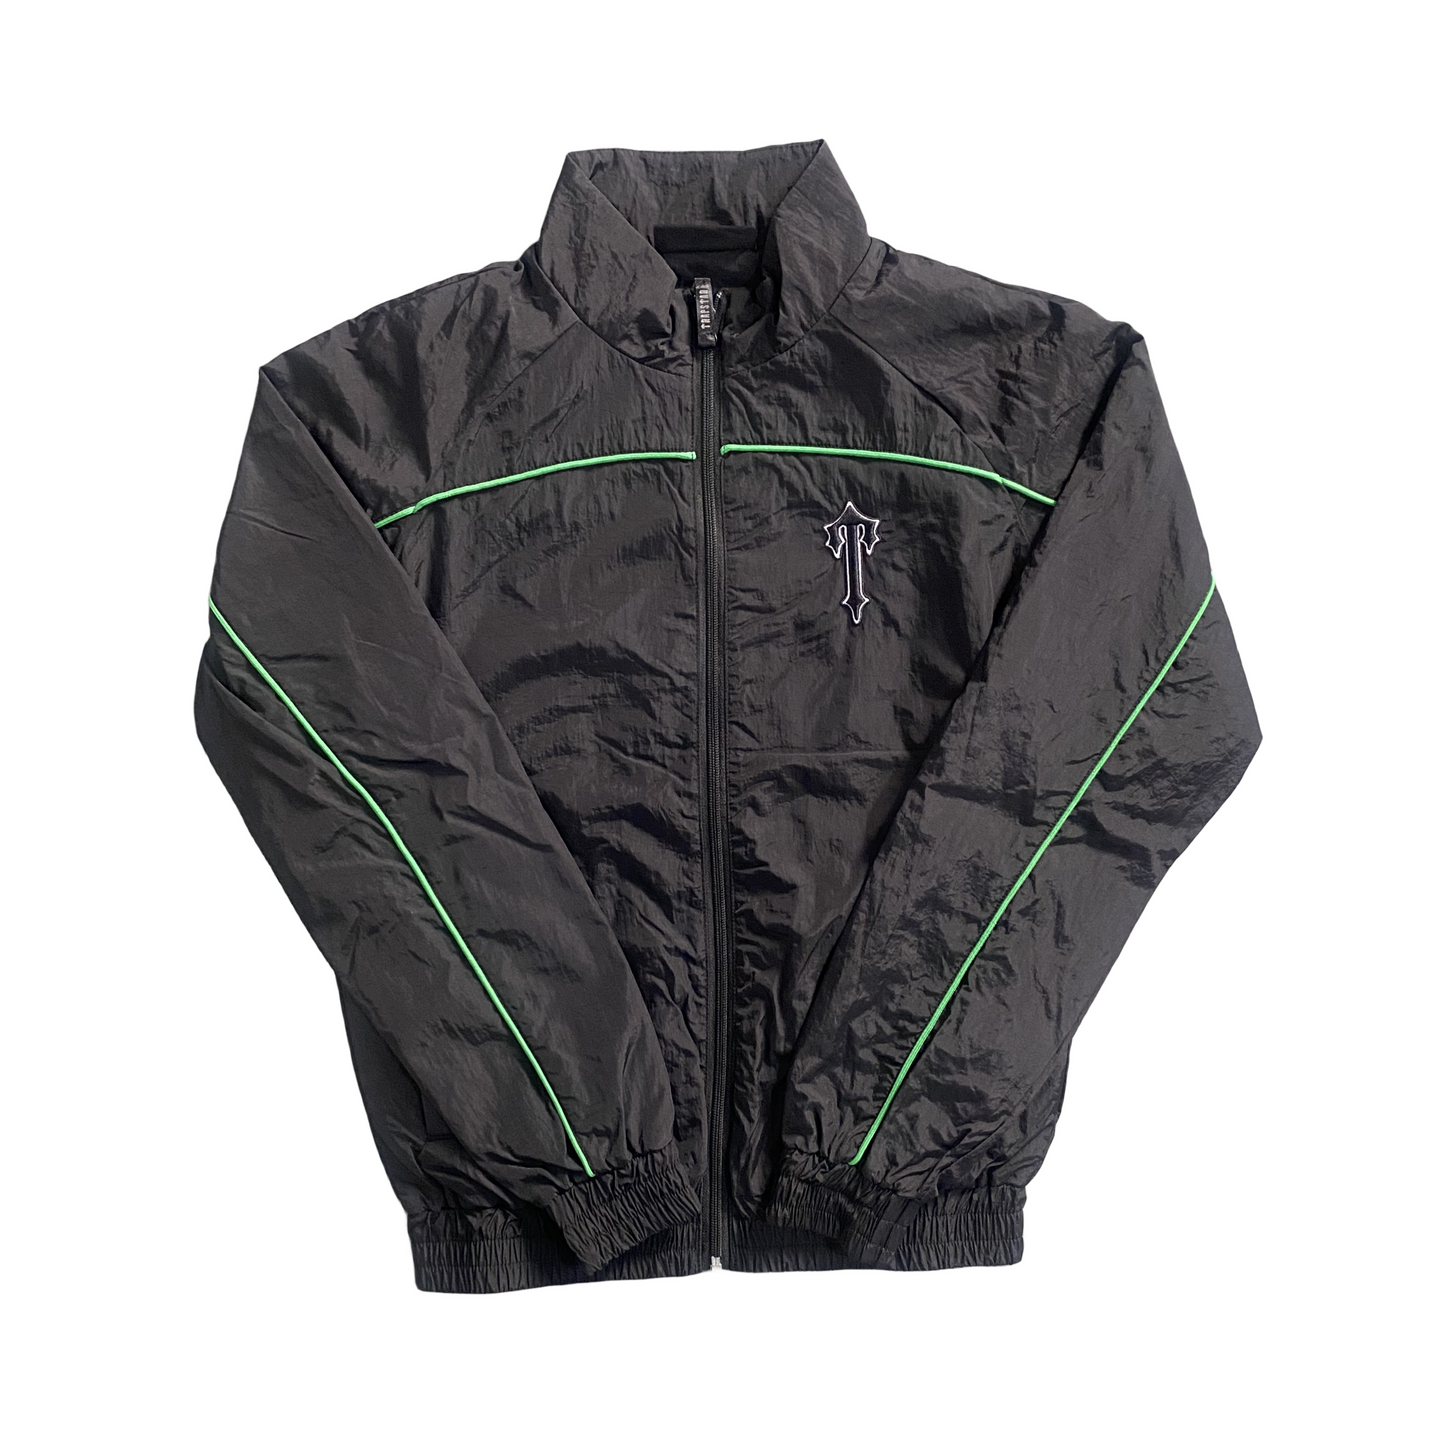 Trapstar Irongate T Arch Panel Shellsuit Tracksuit Jacket and Pants Sets - Black/Green